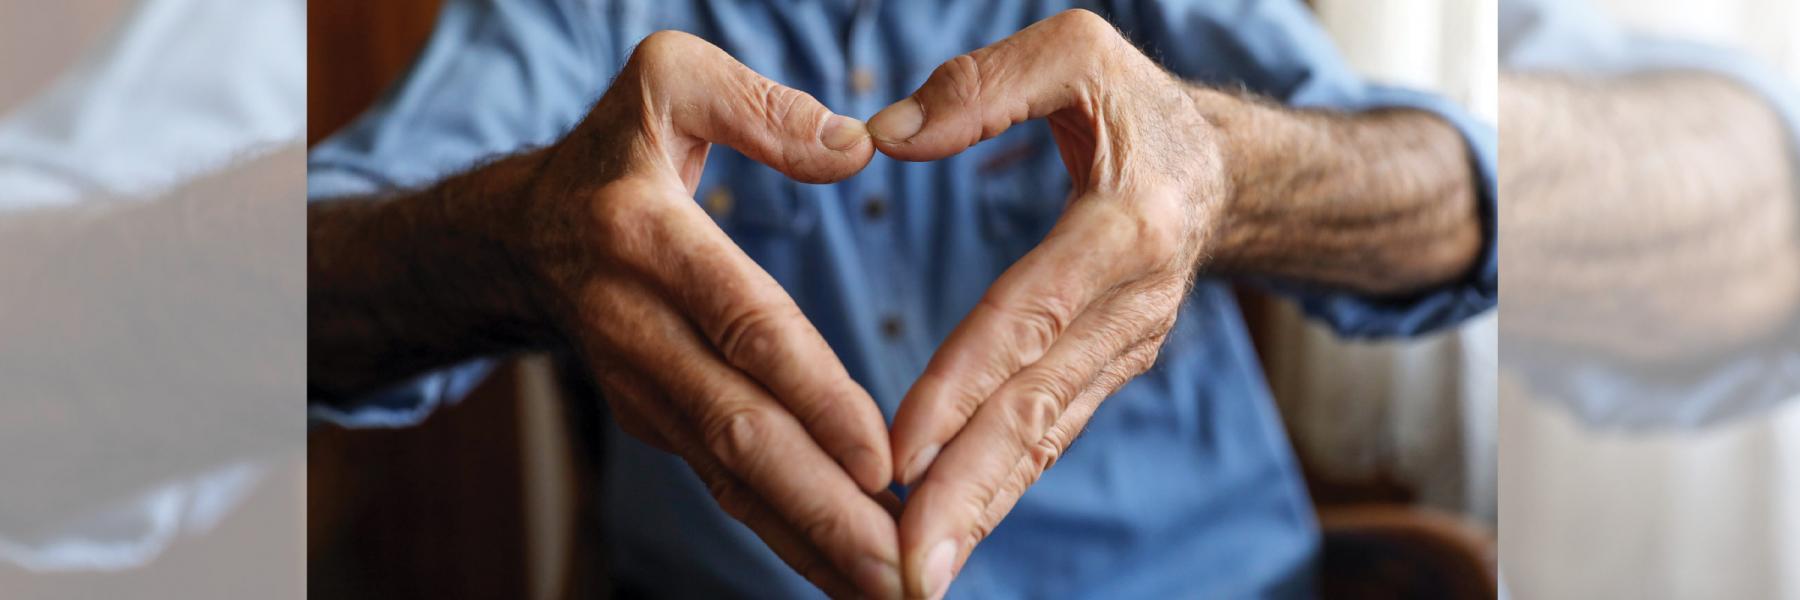 the shape of a heart, formed by the hands of an elderly man